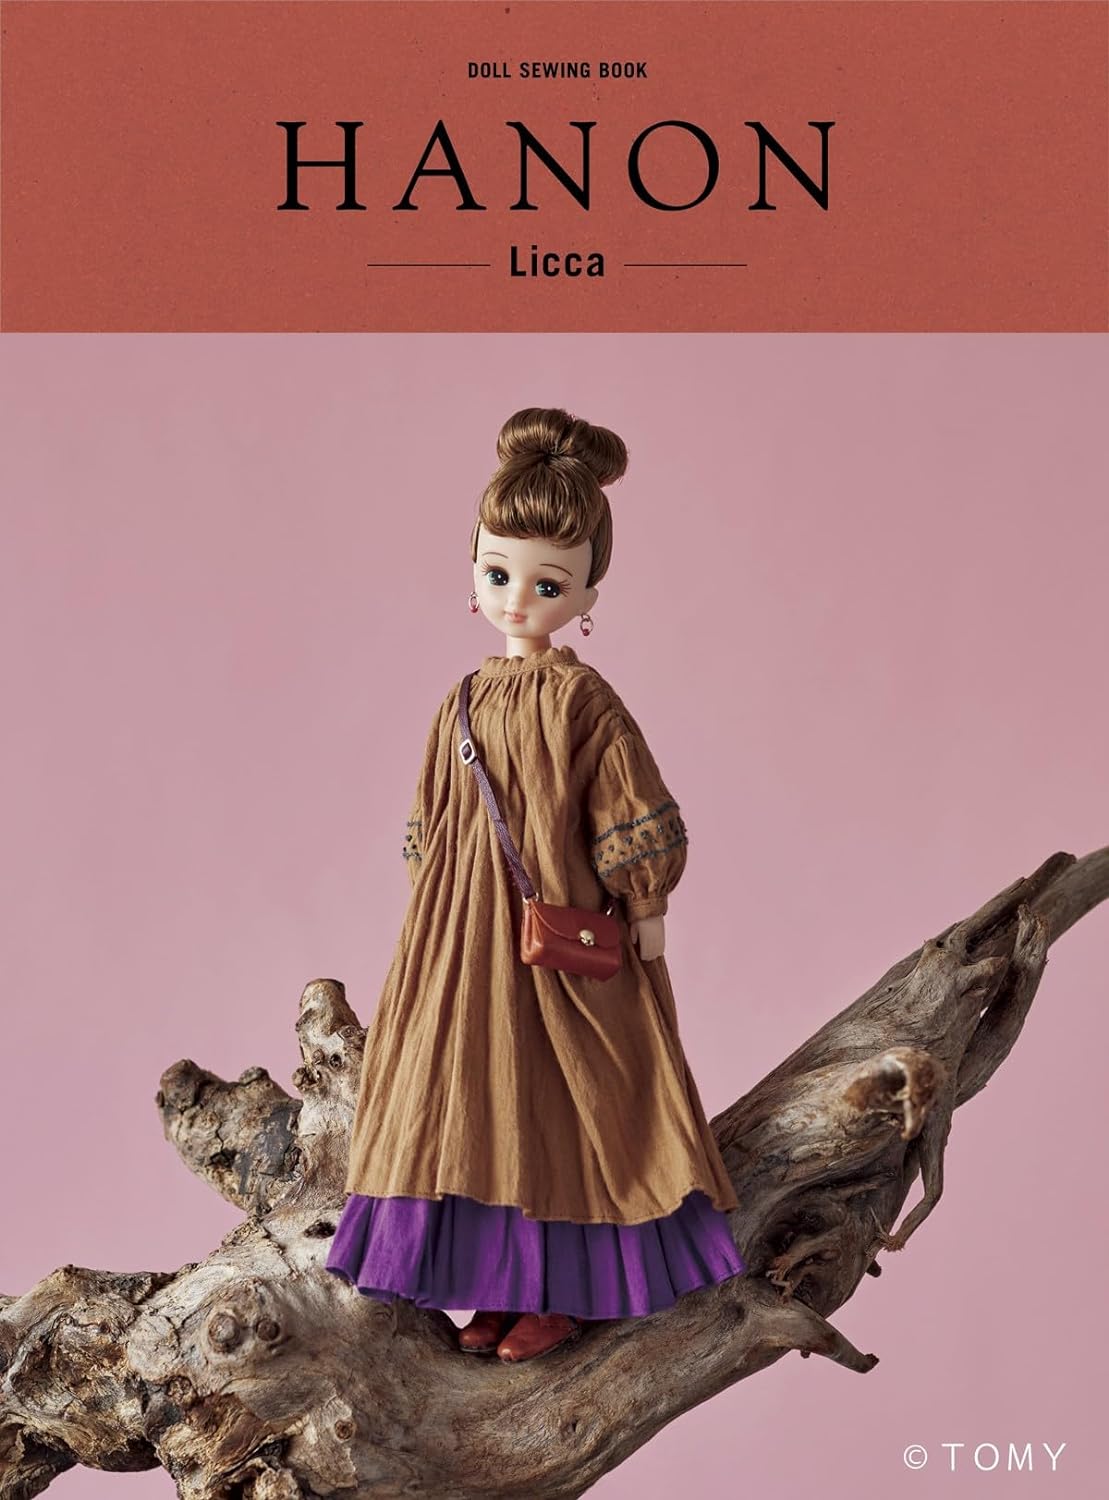 DOLL SEWING BOOK HANON -Licca- – Japanese Creative Bookstore